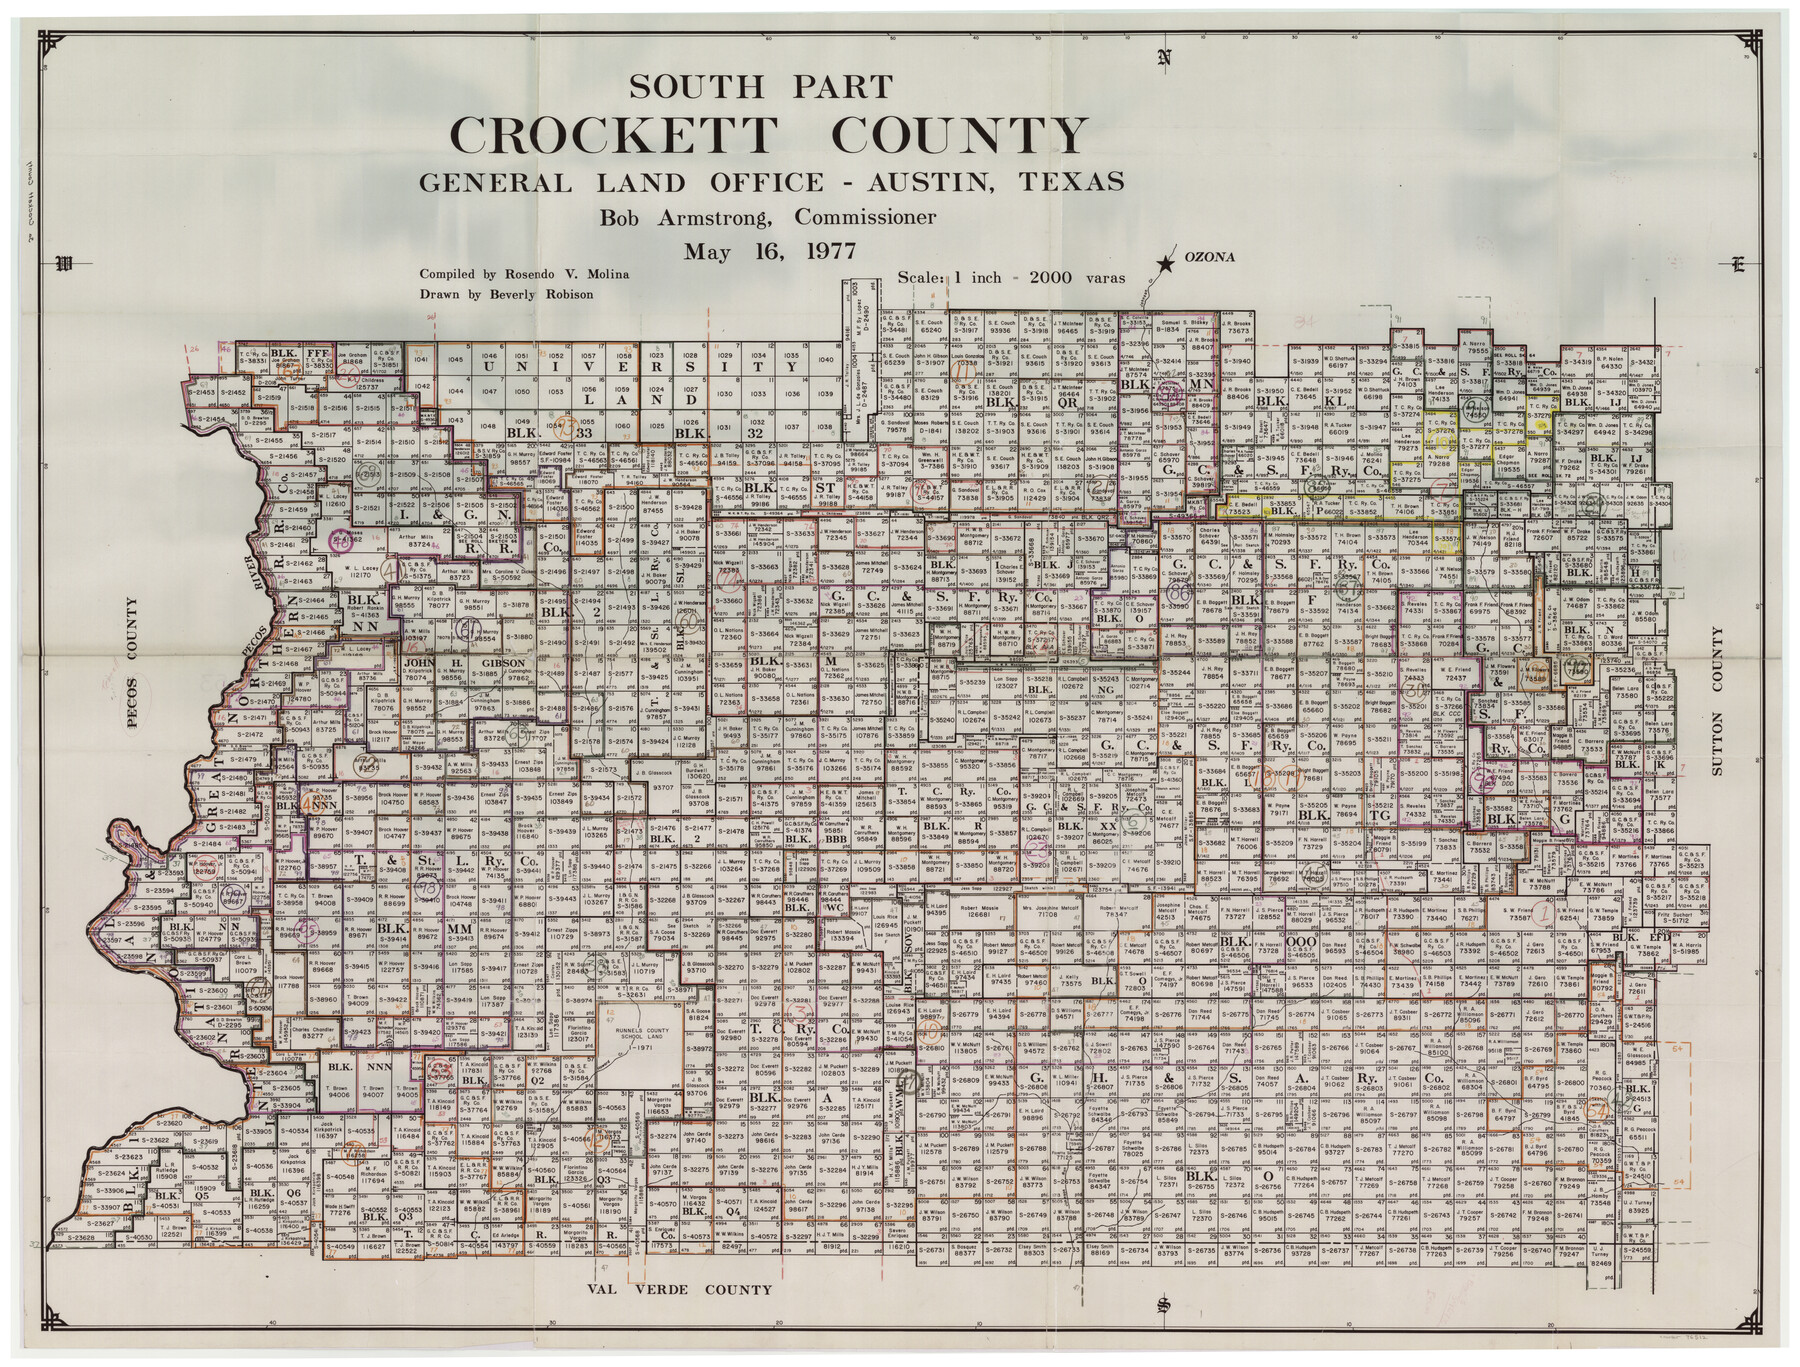 76512, Crockett County Working Sketch Graphic Index - south part, General Map Collection